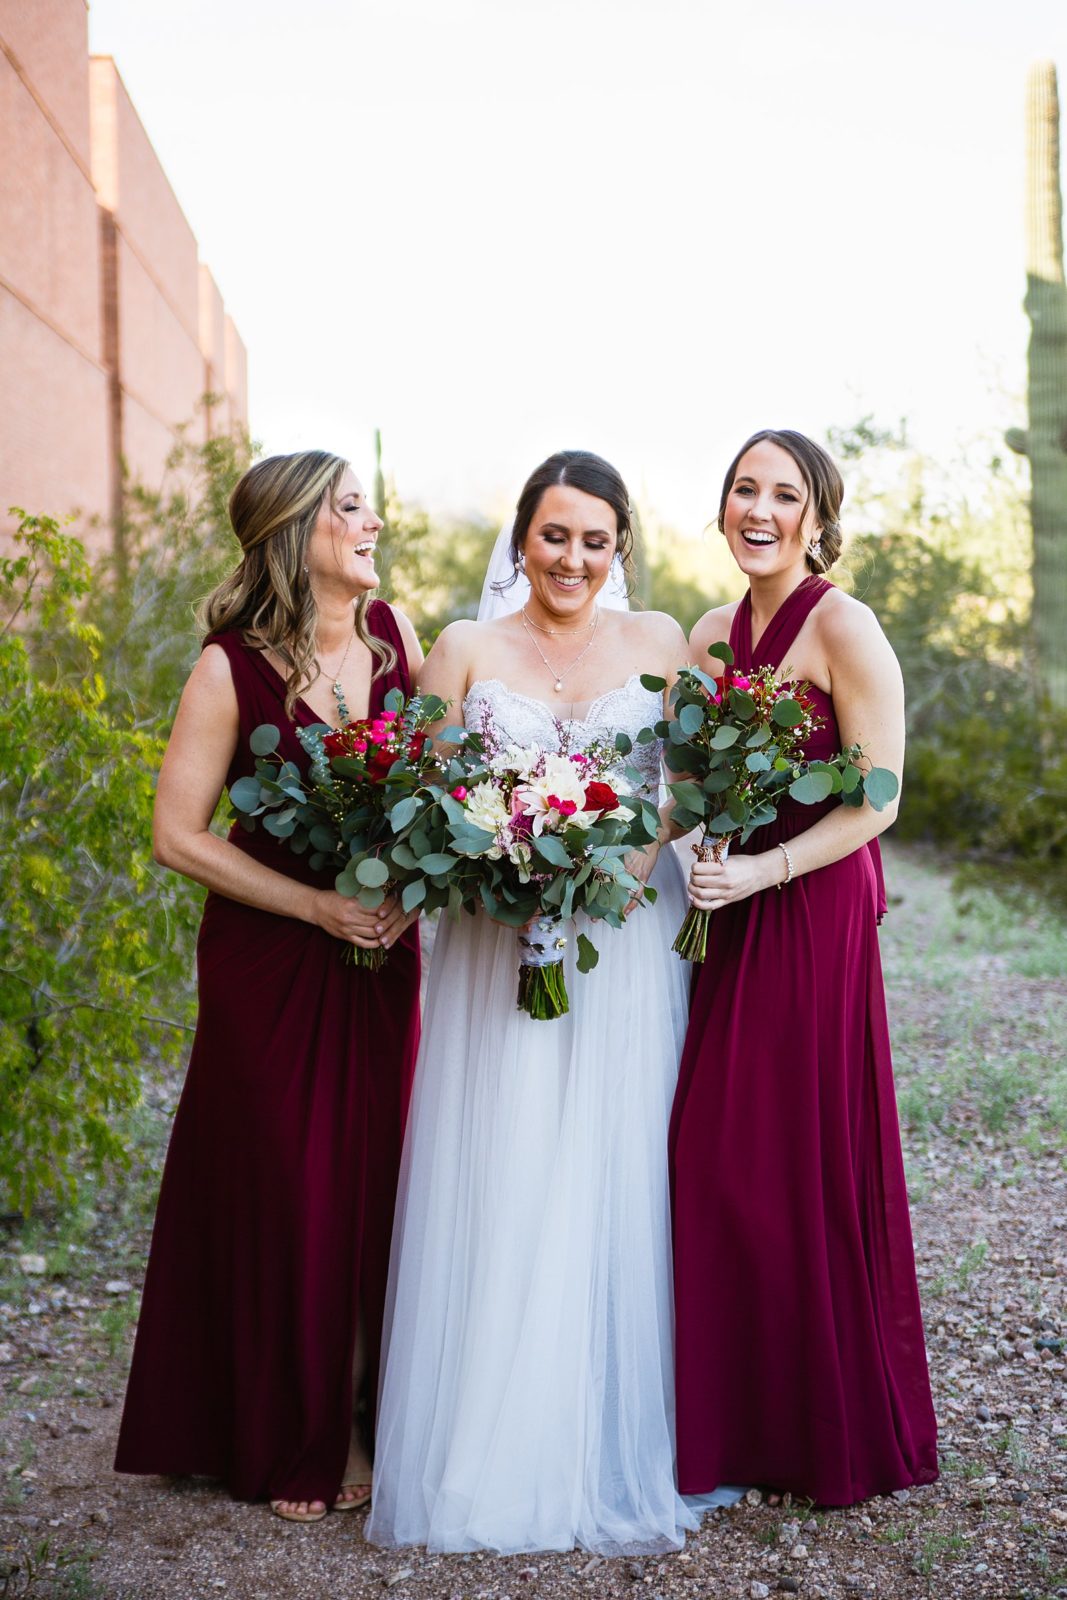 Bride and bridesmaids laughing together at Arizona Heritage Center at Papago Park wedding by Tempe wedding photographer PMA Photography.